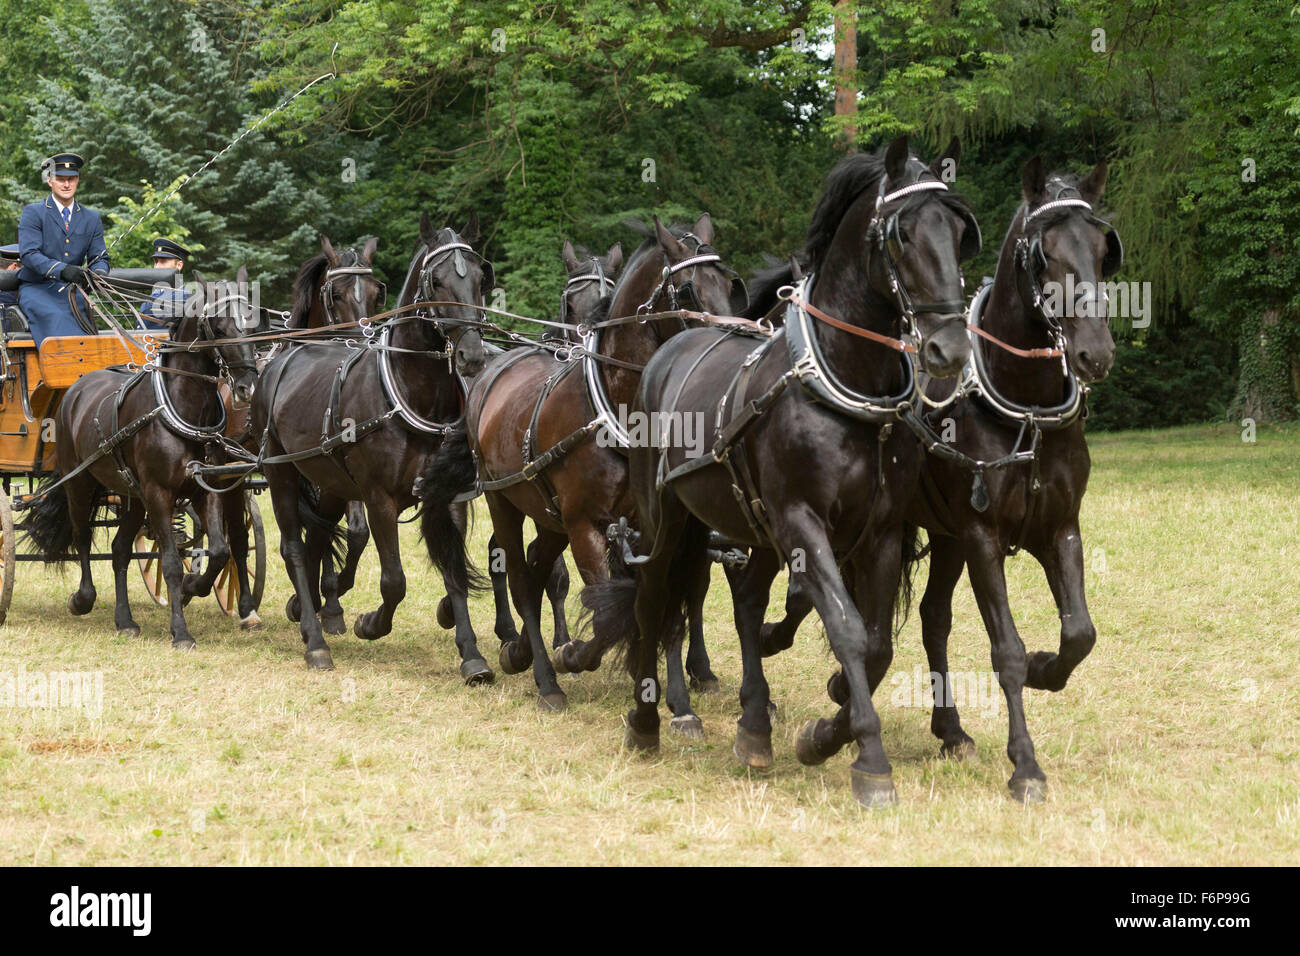 Horse Rare Kladruber tradition animal festival out Stock Photo